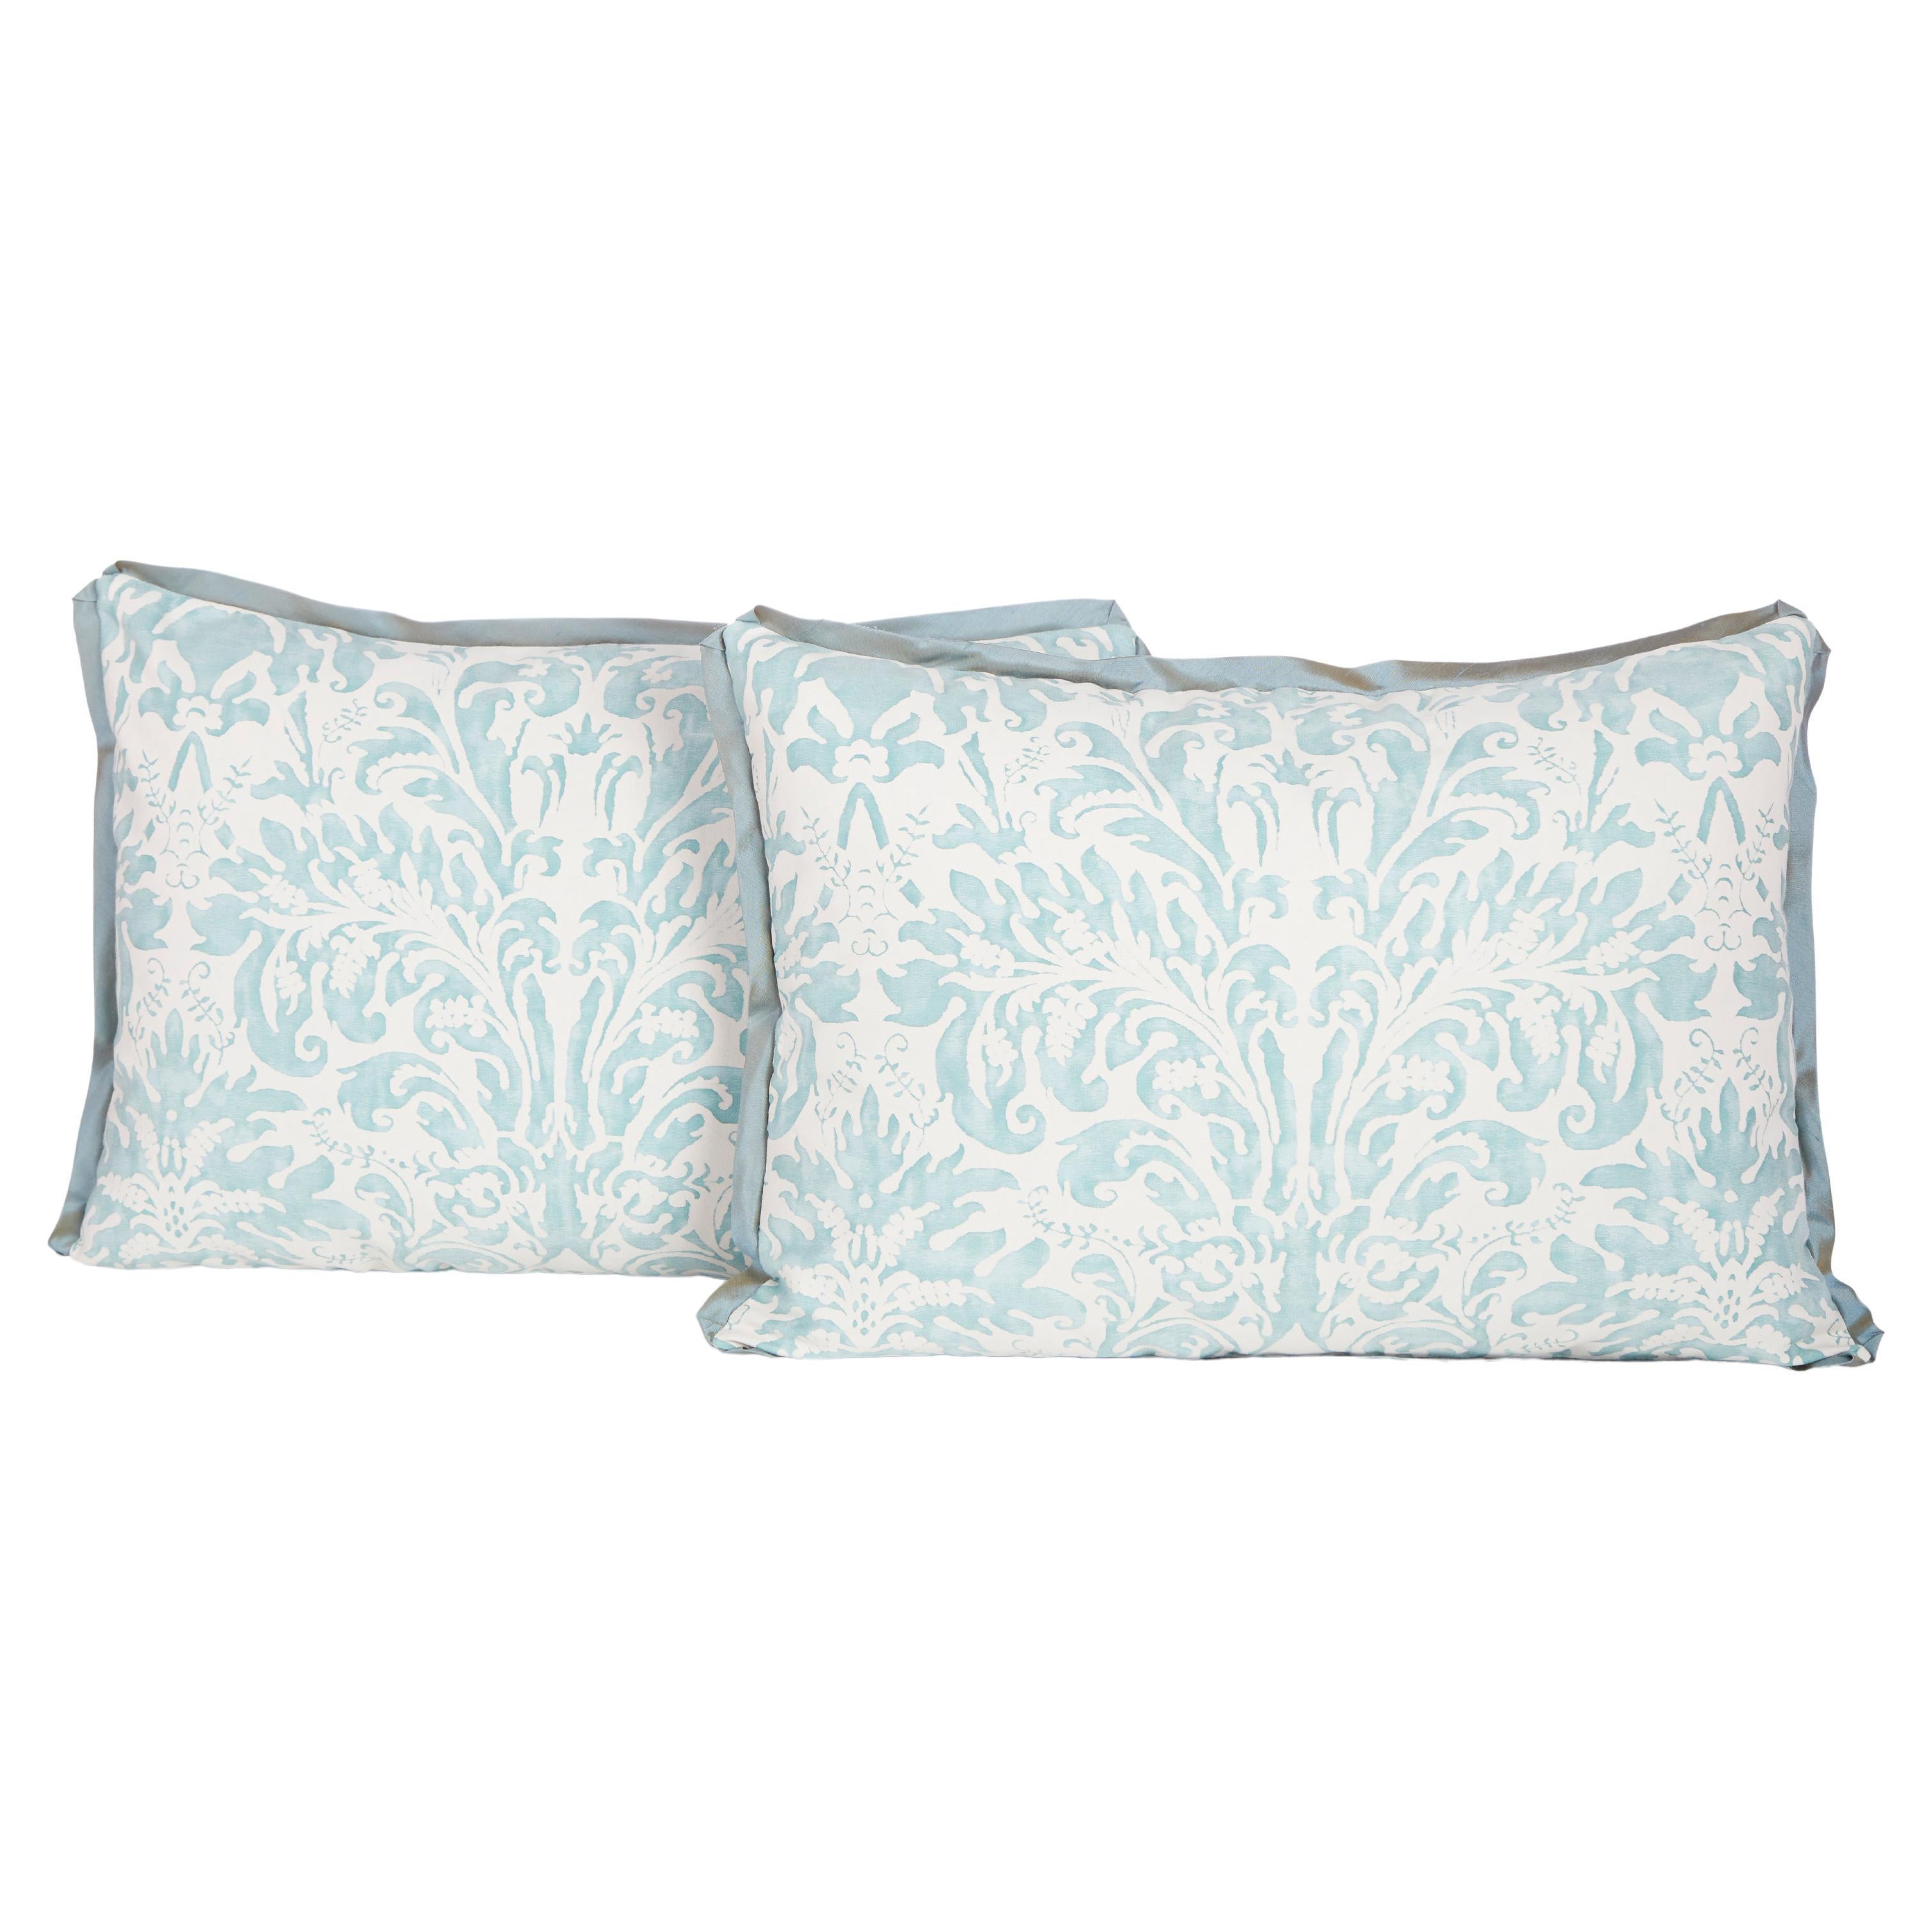 Pair of Fortuny Sevigne Cushions in French Blue and Antique White David Duncan For Sale